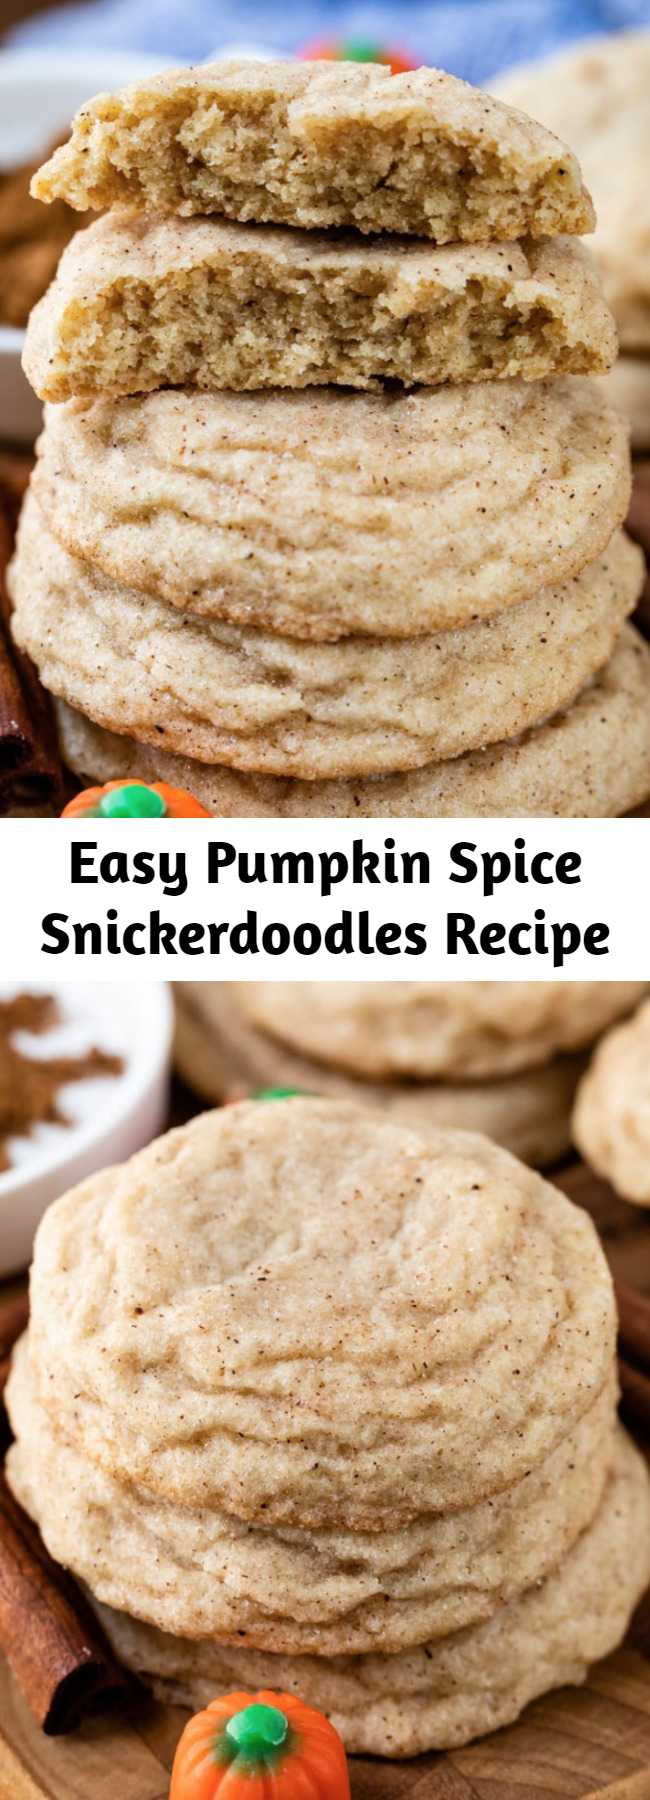 Easy Pumpkin Spice Snickerdoodles Recipe - We love this easy cookie recipe! Make snickerdoodles with pumpkin pie spice! Pumpkin Spice Snickerdoodles are the best fall cookie recipe!